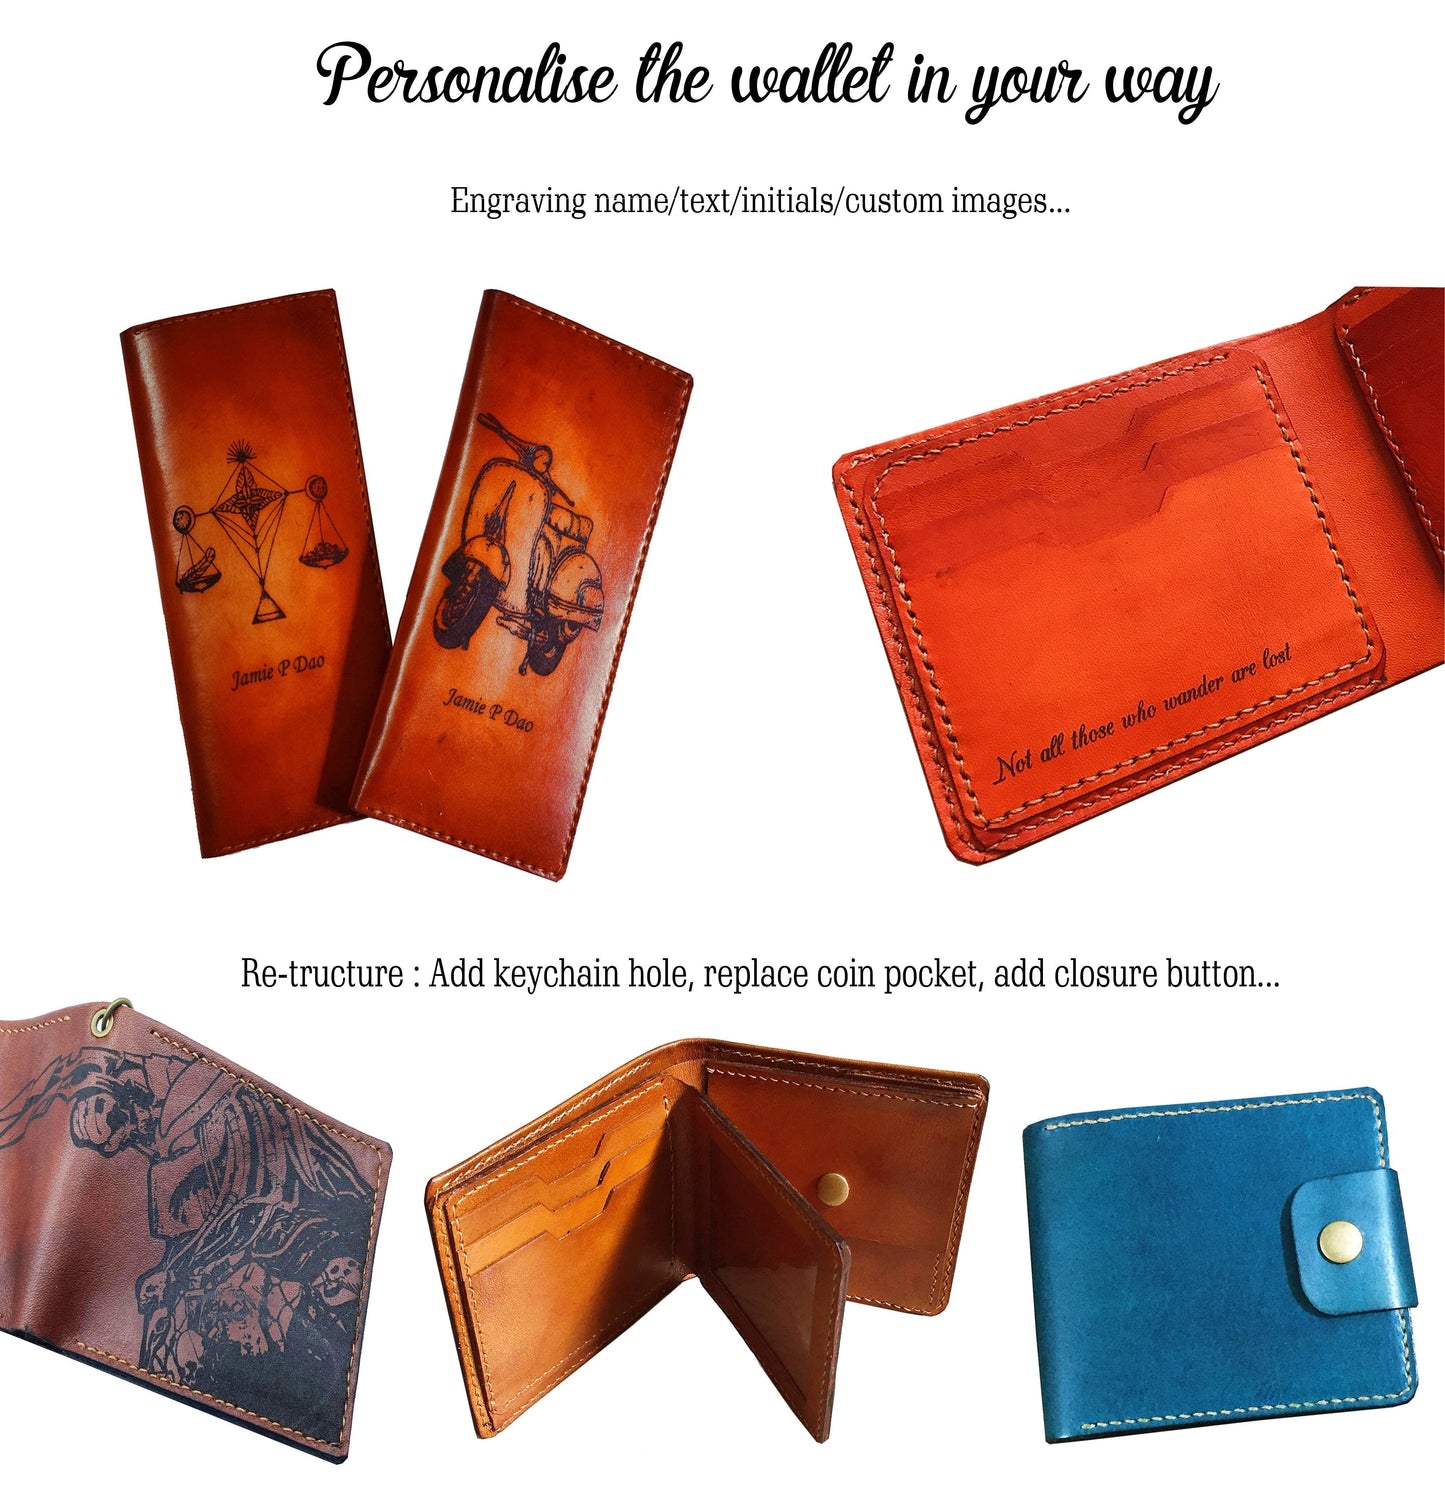 Mayan Corner - Freiza golden form leather wallet, customized dragon ball wallet, dragon ball leather gift for husband, cool gift for dad, super villain leather wallet